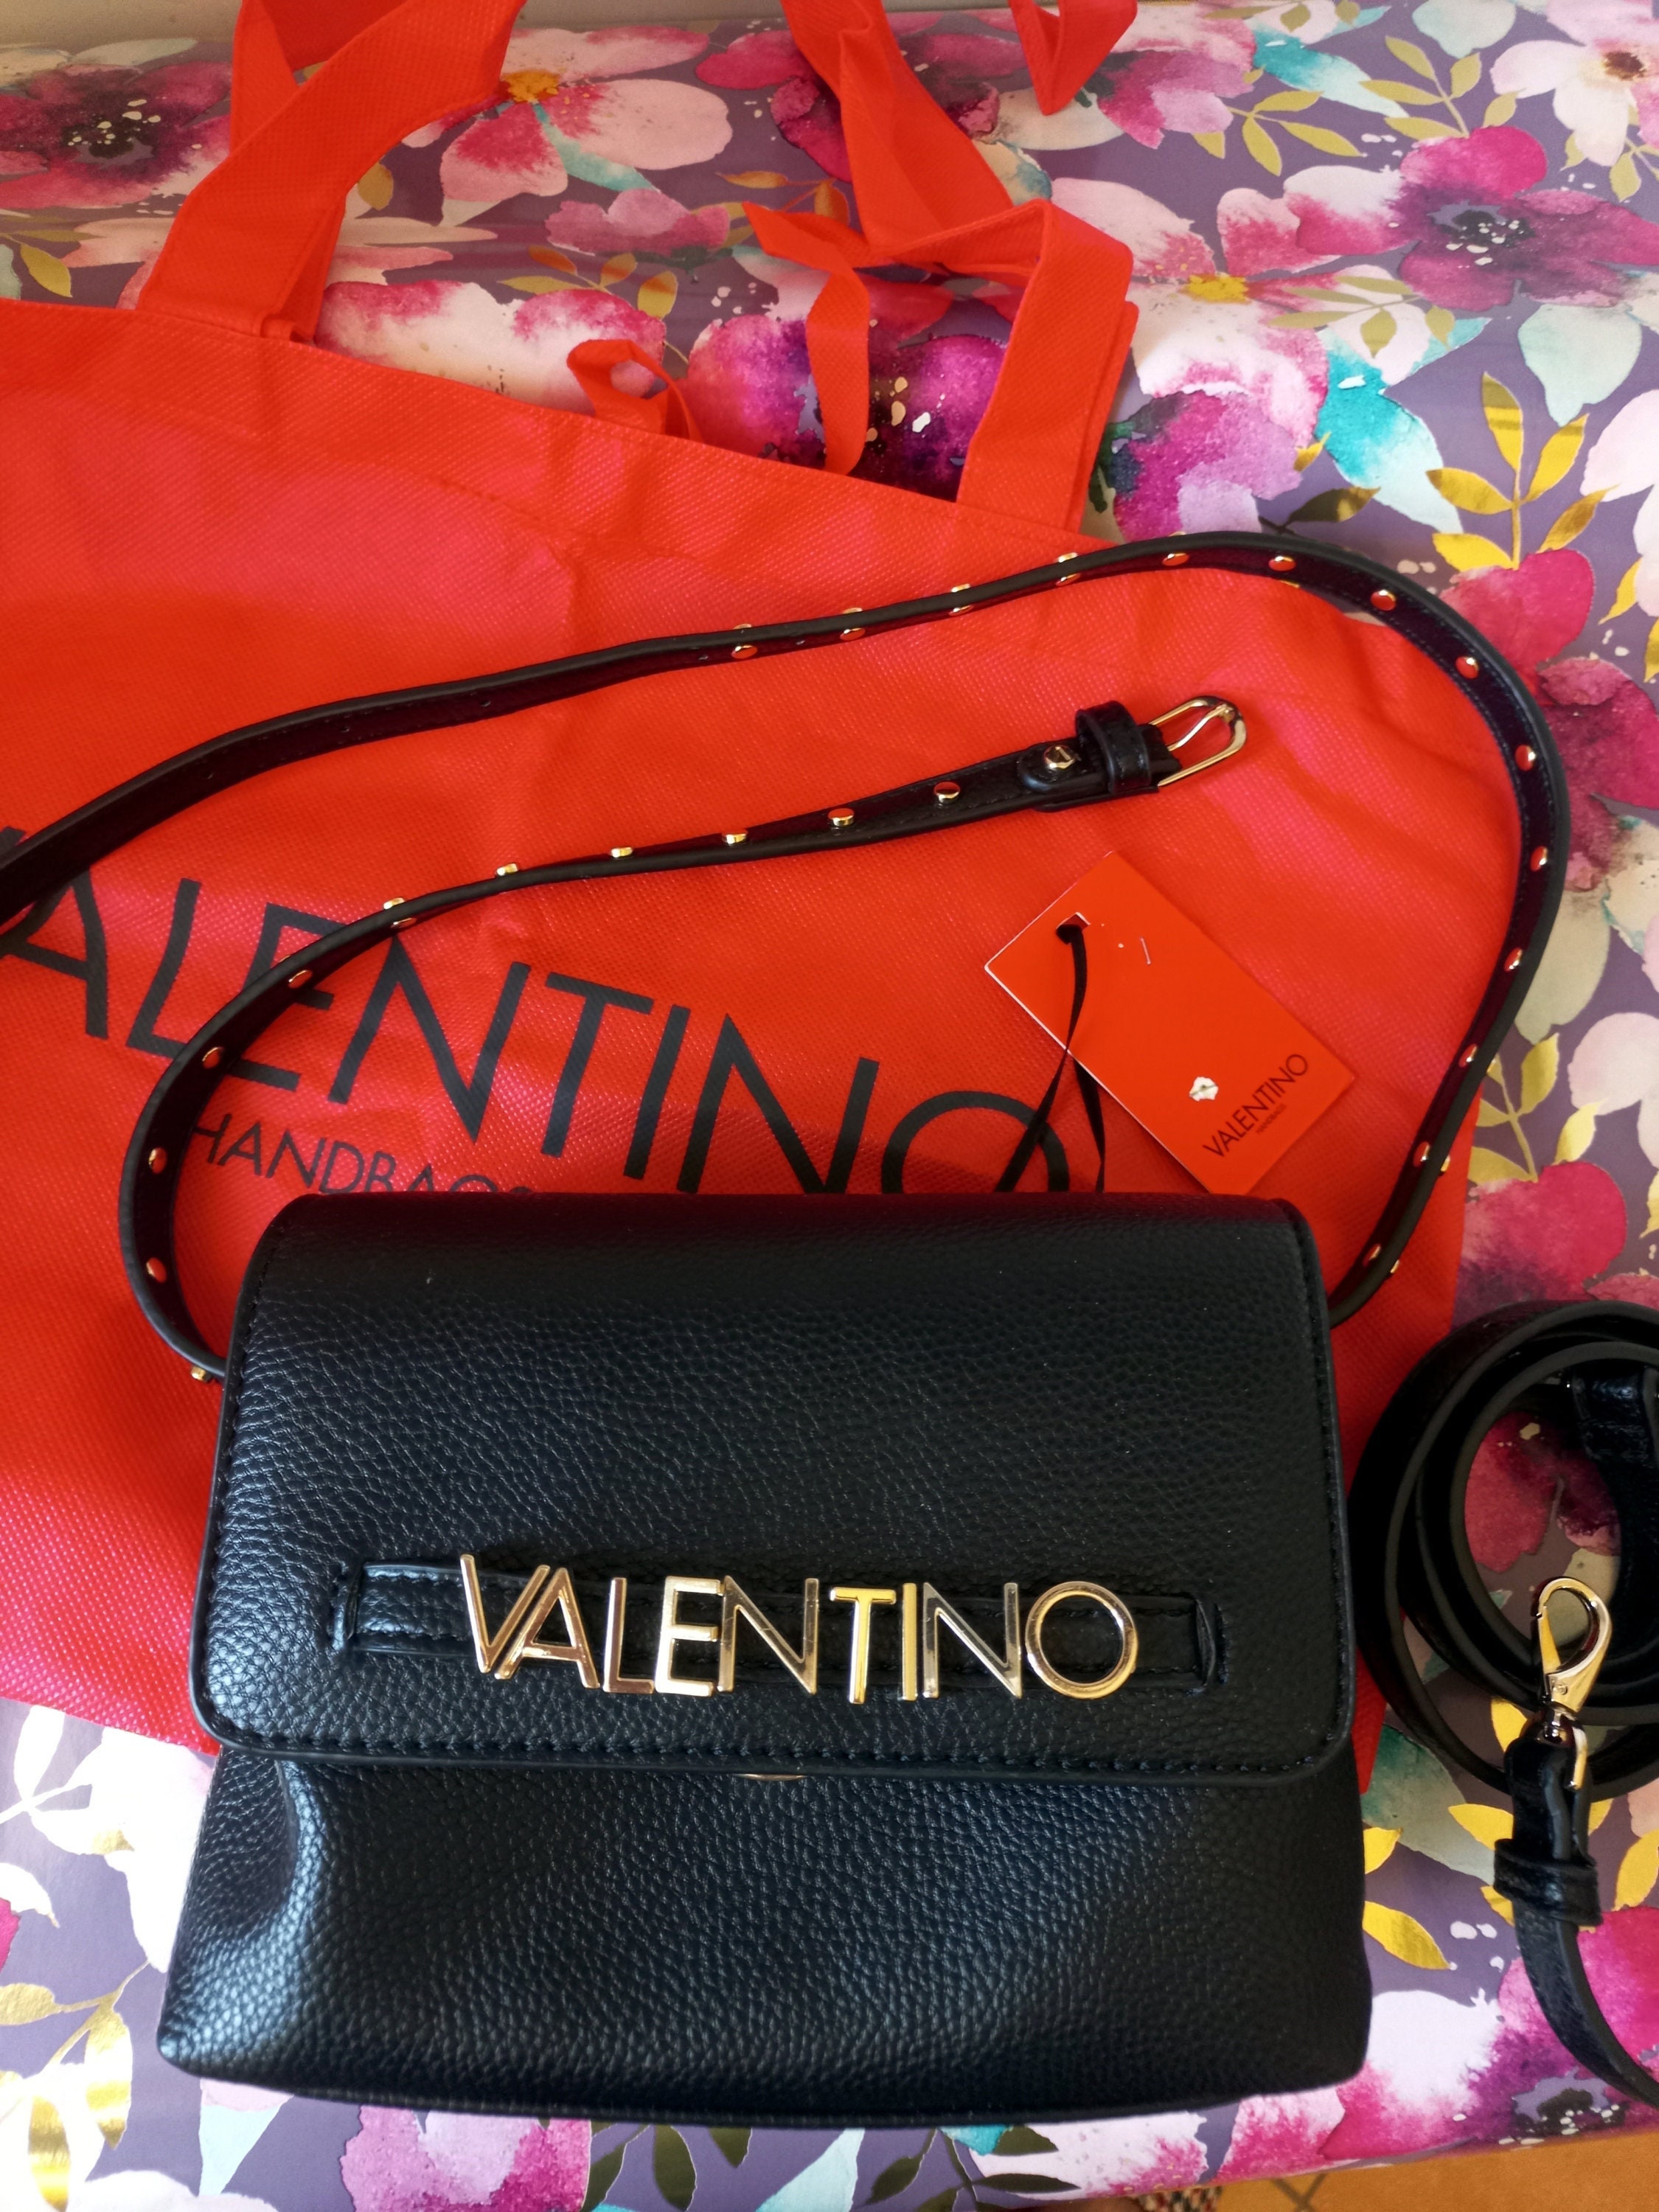 Valentino Bag by Mario Valentino S.p.A., Brand New Authentic, Red.